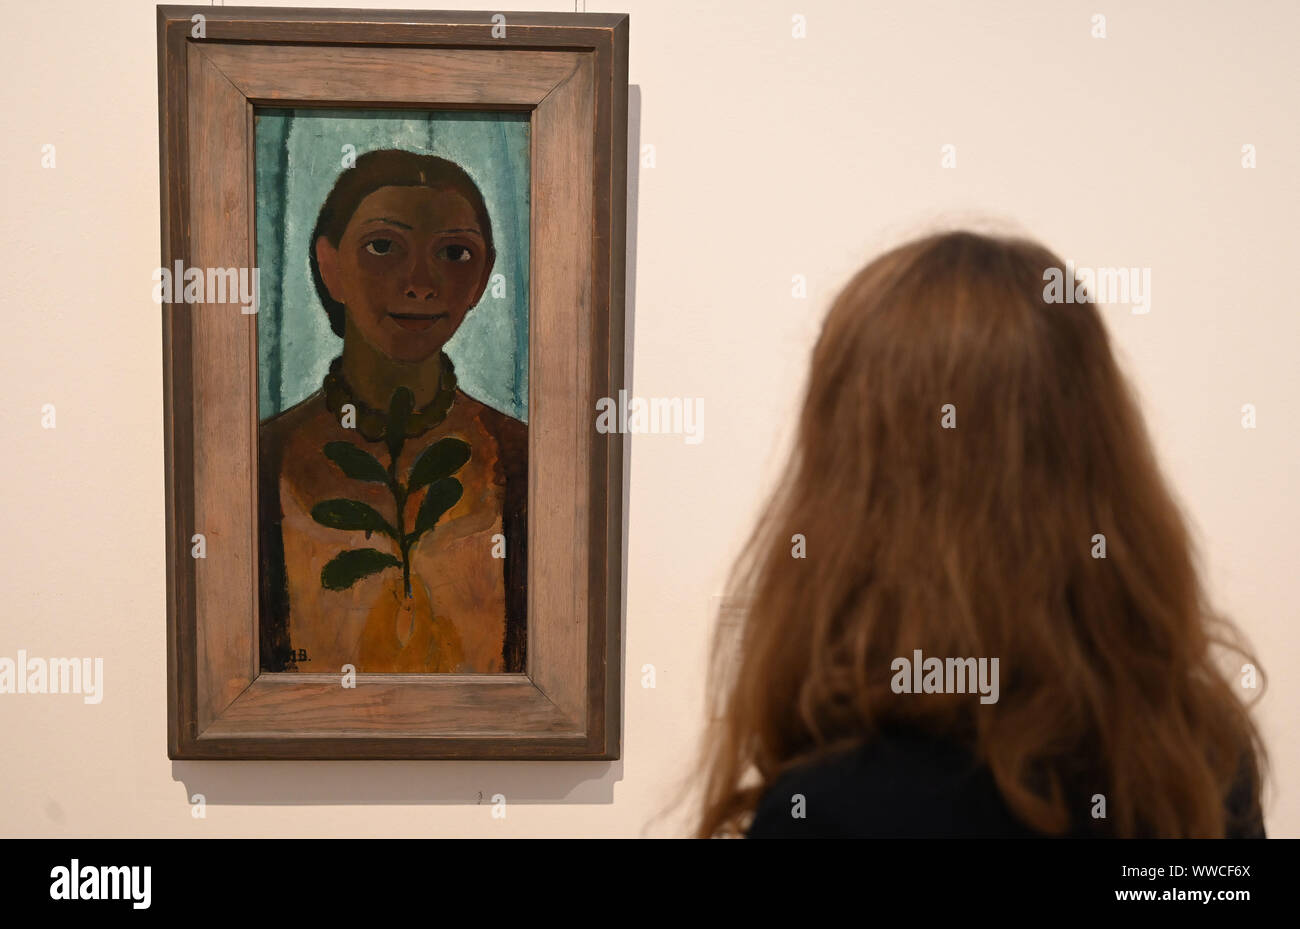 Bremen, Germany. 12th Sep, 2019. An employee of the Paula Modersohn-Becker Museum looks at Paula Modersohn-Becker's painting 'Self-Portrait with Camellia Branch', 1906/07. In the special exhibition 'I am me. Paula Modersohn-Becker. Die Selbstbildnisse' will be shown for the first time around 50 of a total of over 60 self-portraits by Paula Modersohn-Becker (1876-1907). The painter is regarded as one of the most important representatives of early Expressionism. The exhibition can be seen from 15.9. to February 2020. Credit: Carmen Jaspersen/dpa/Alamy Live News Stock Photo